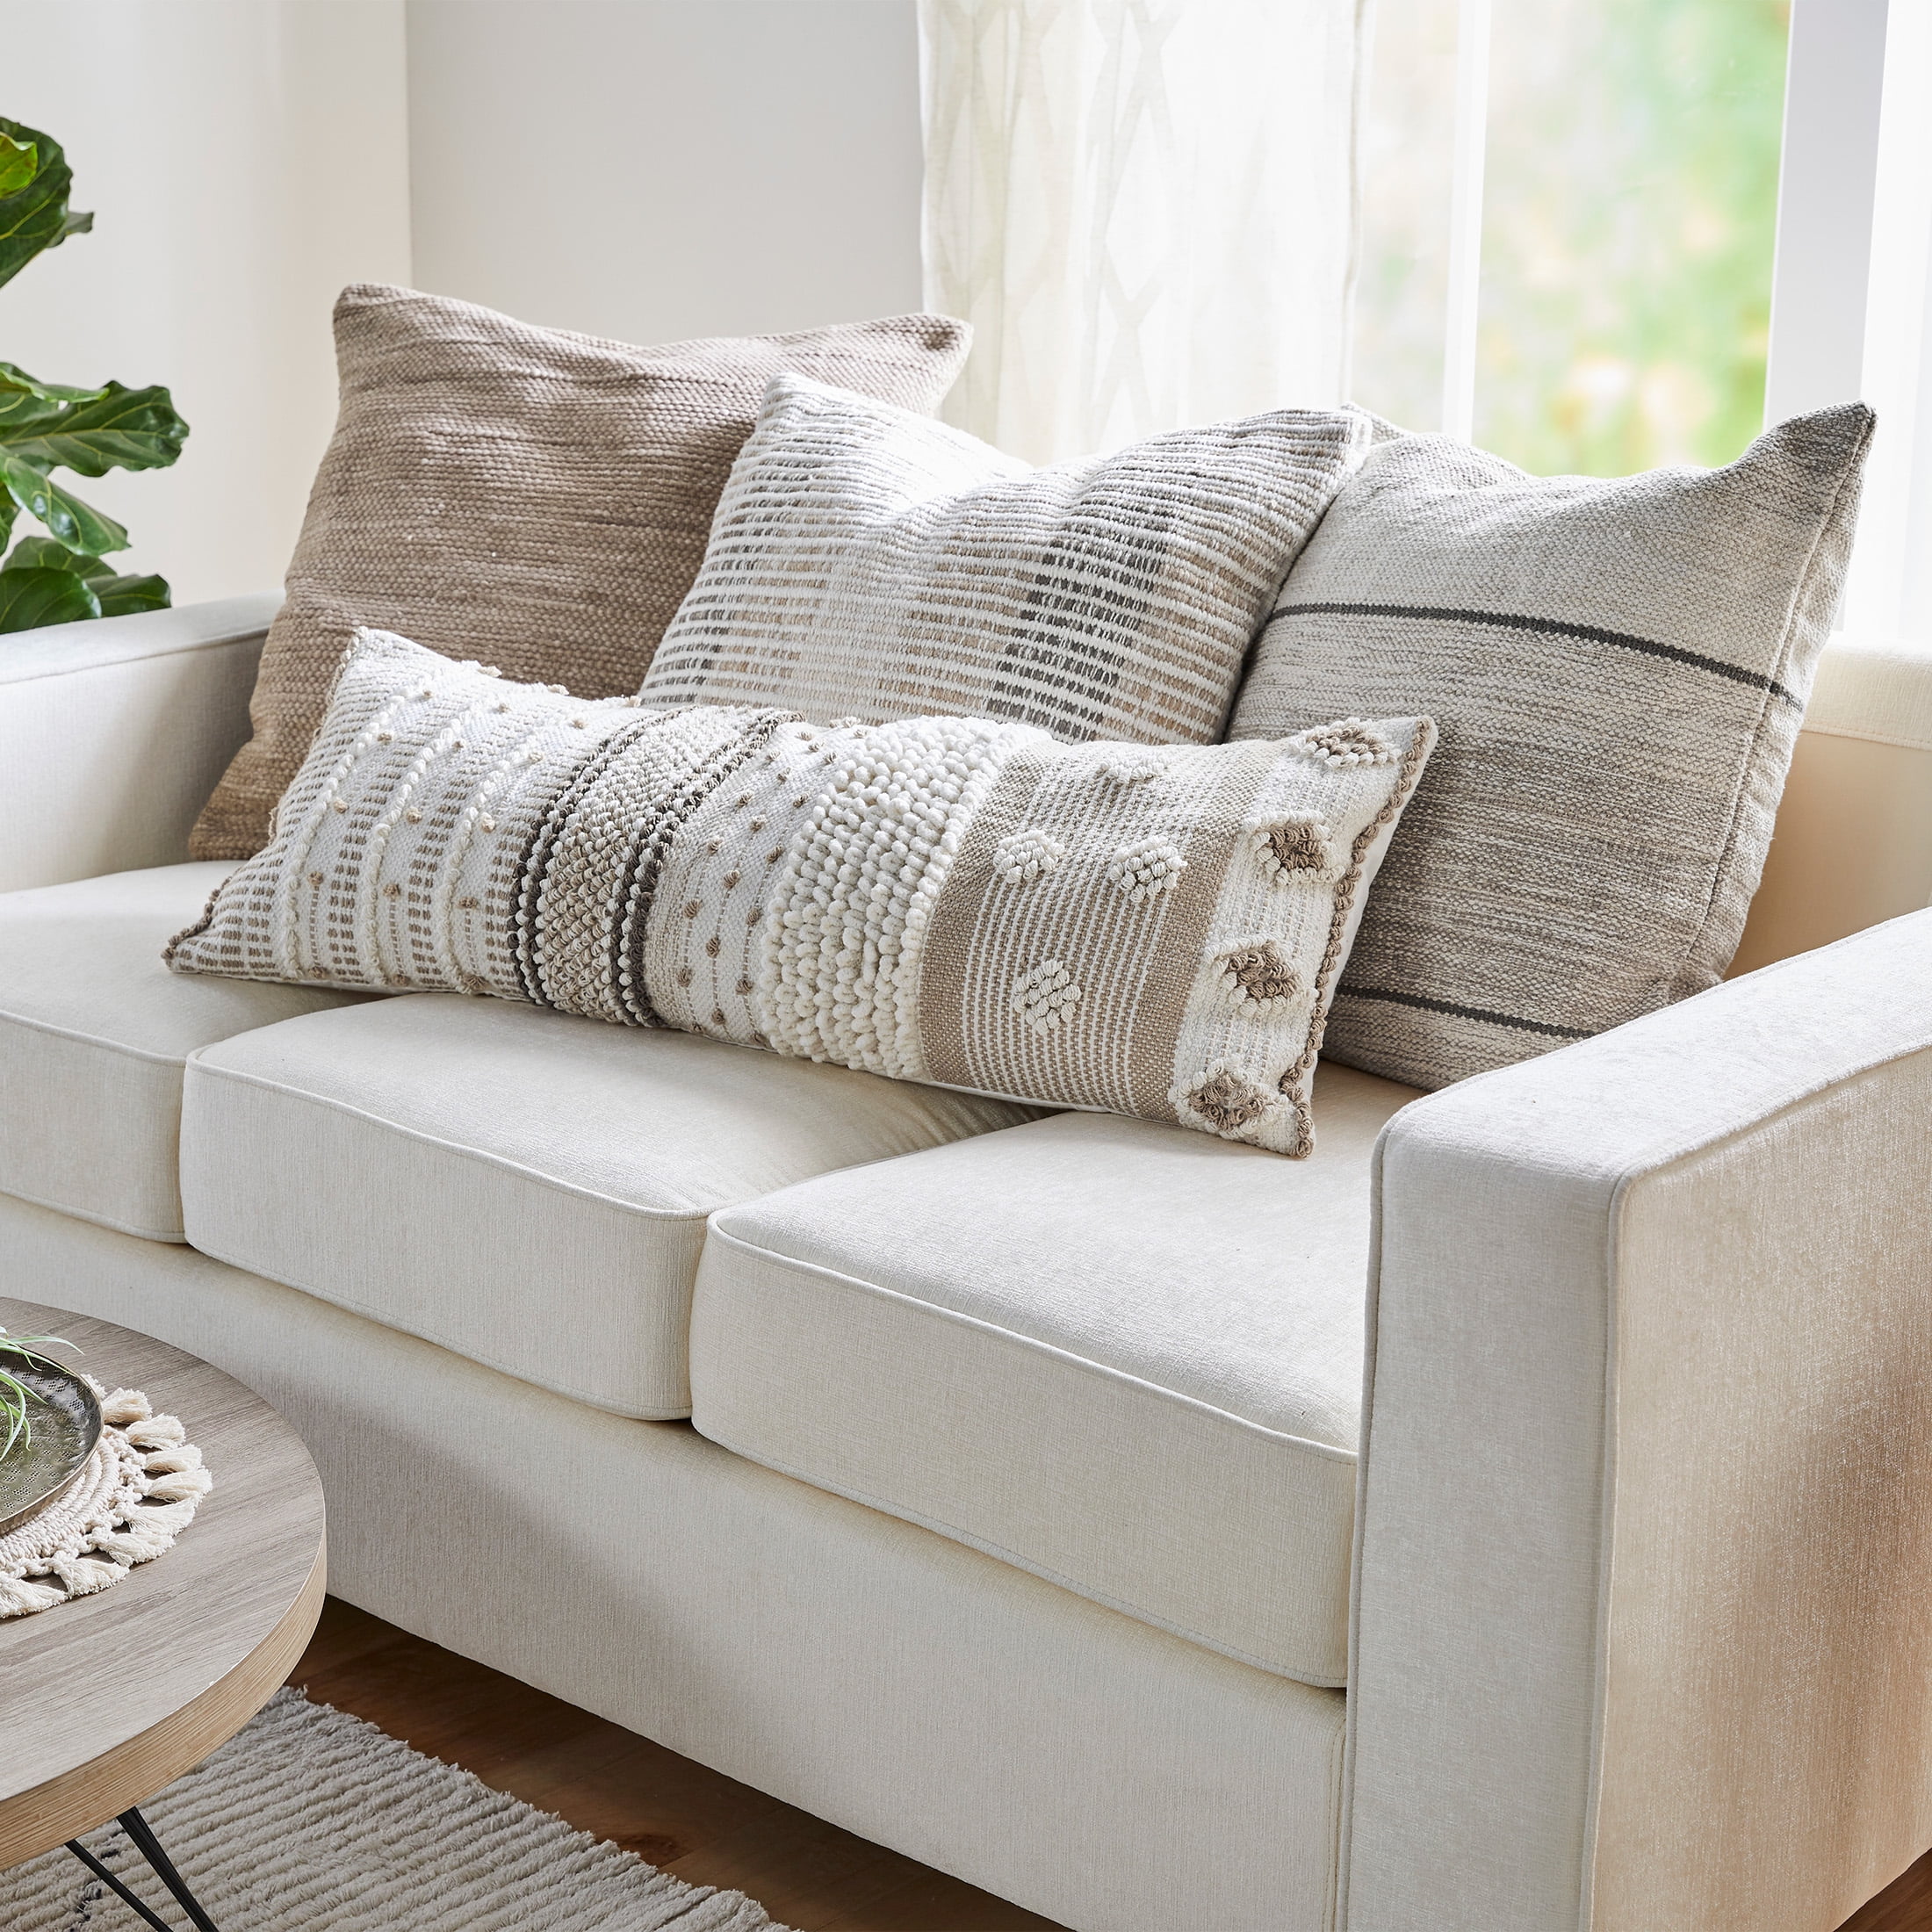 36 Throw Pillows for Grey Couch to Showcase Your Home